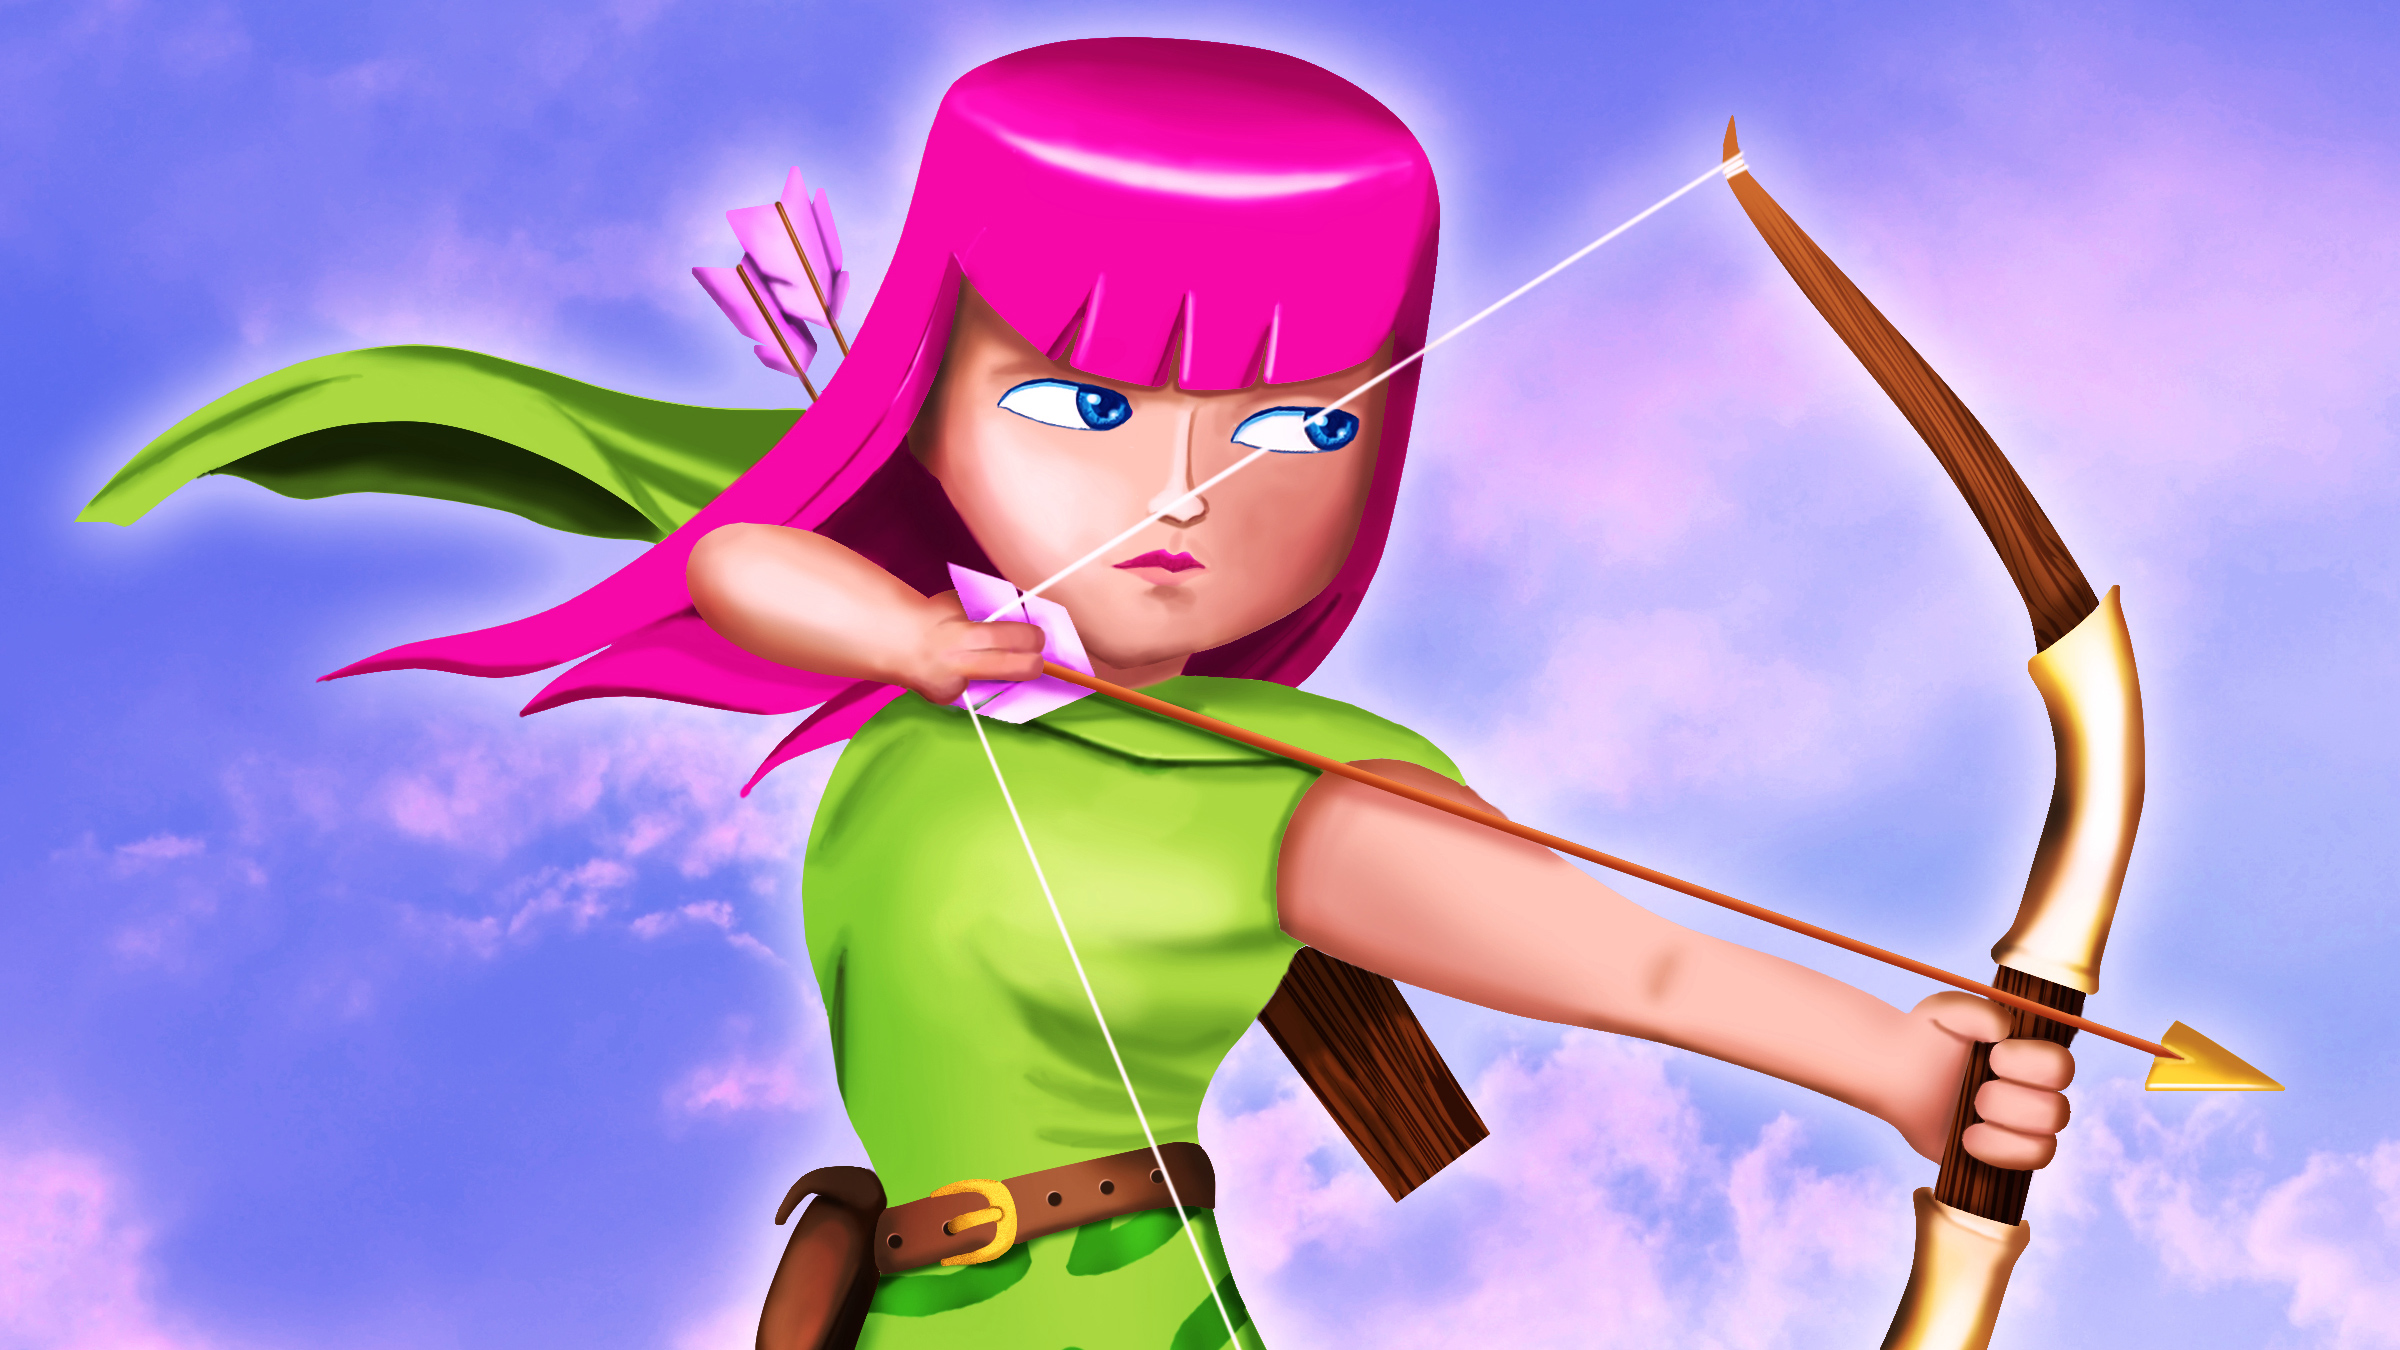 Free photo Archer with pink hair from the game Clash Of Clans